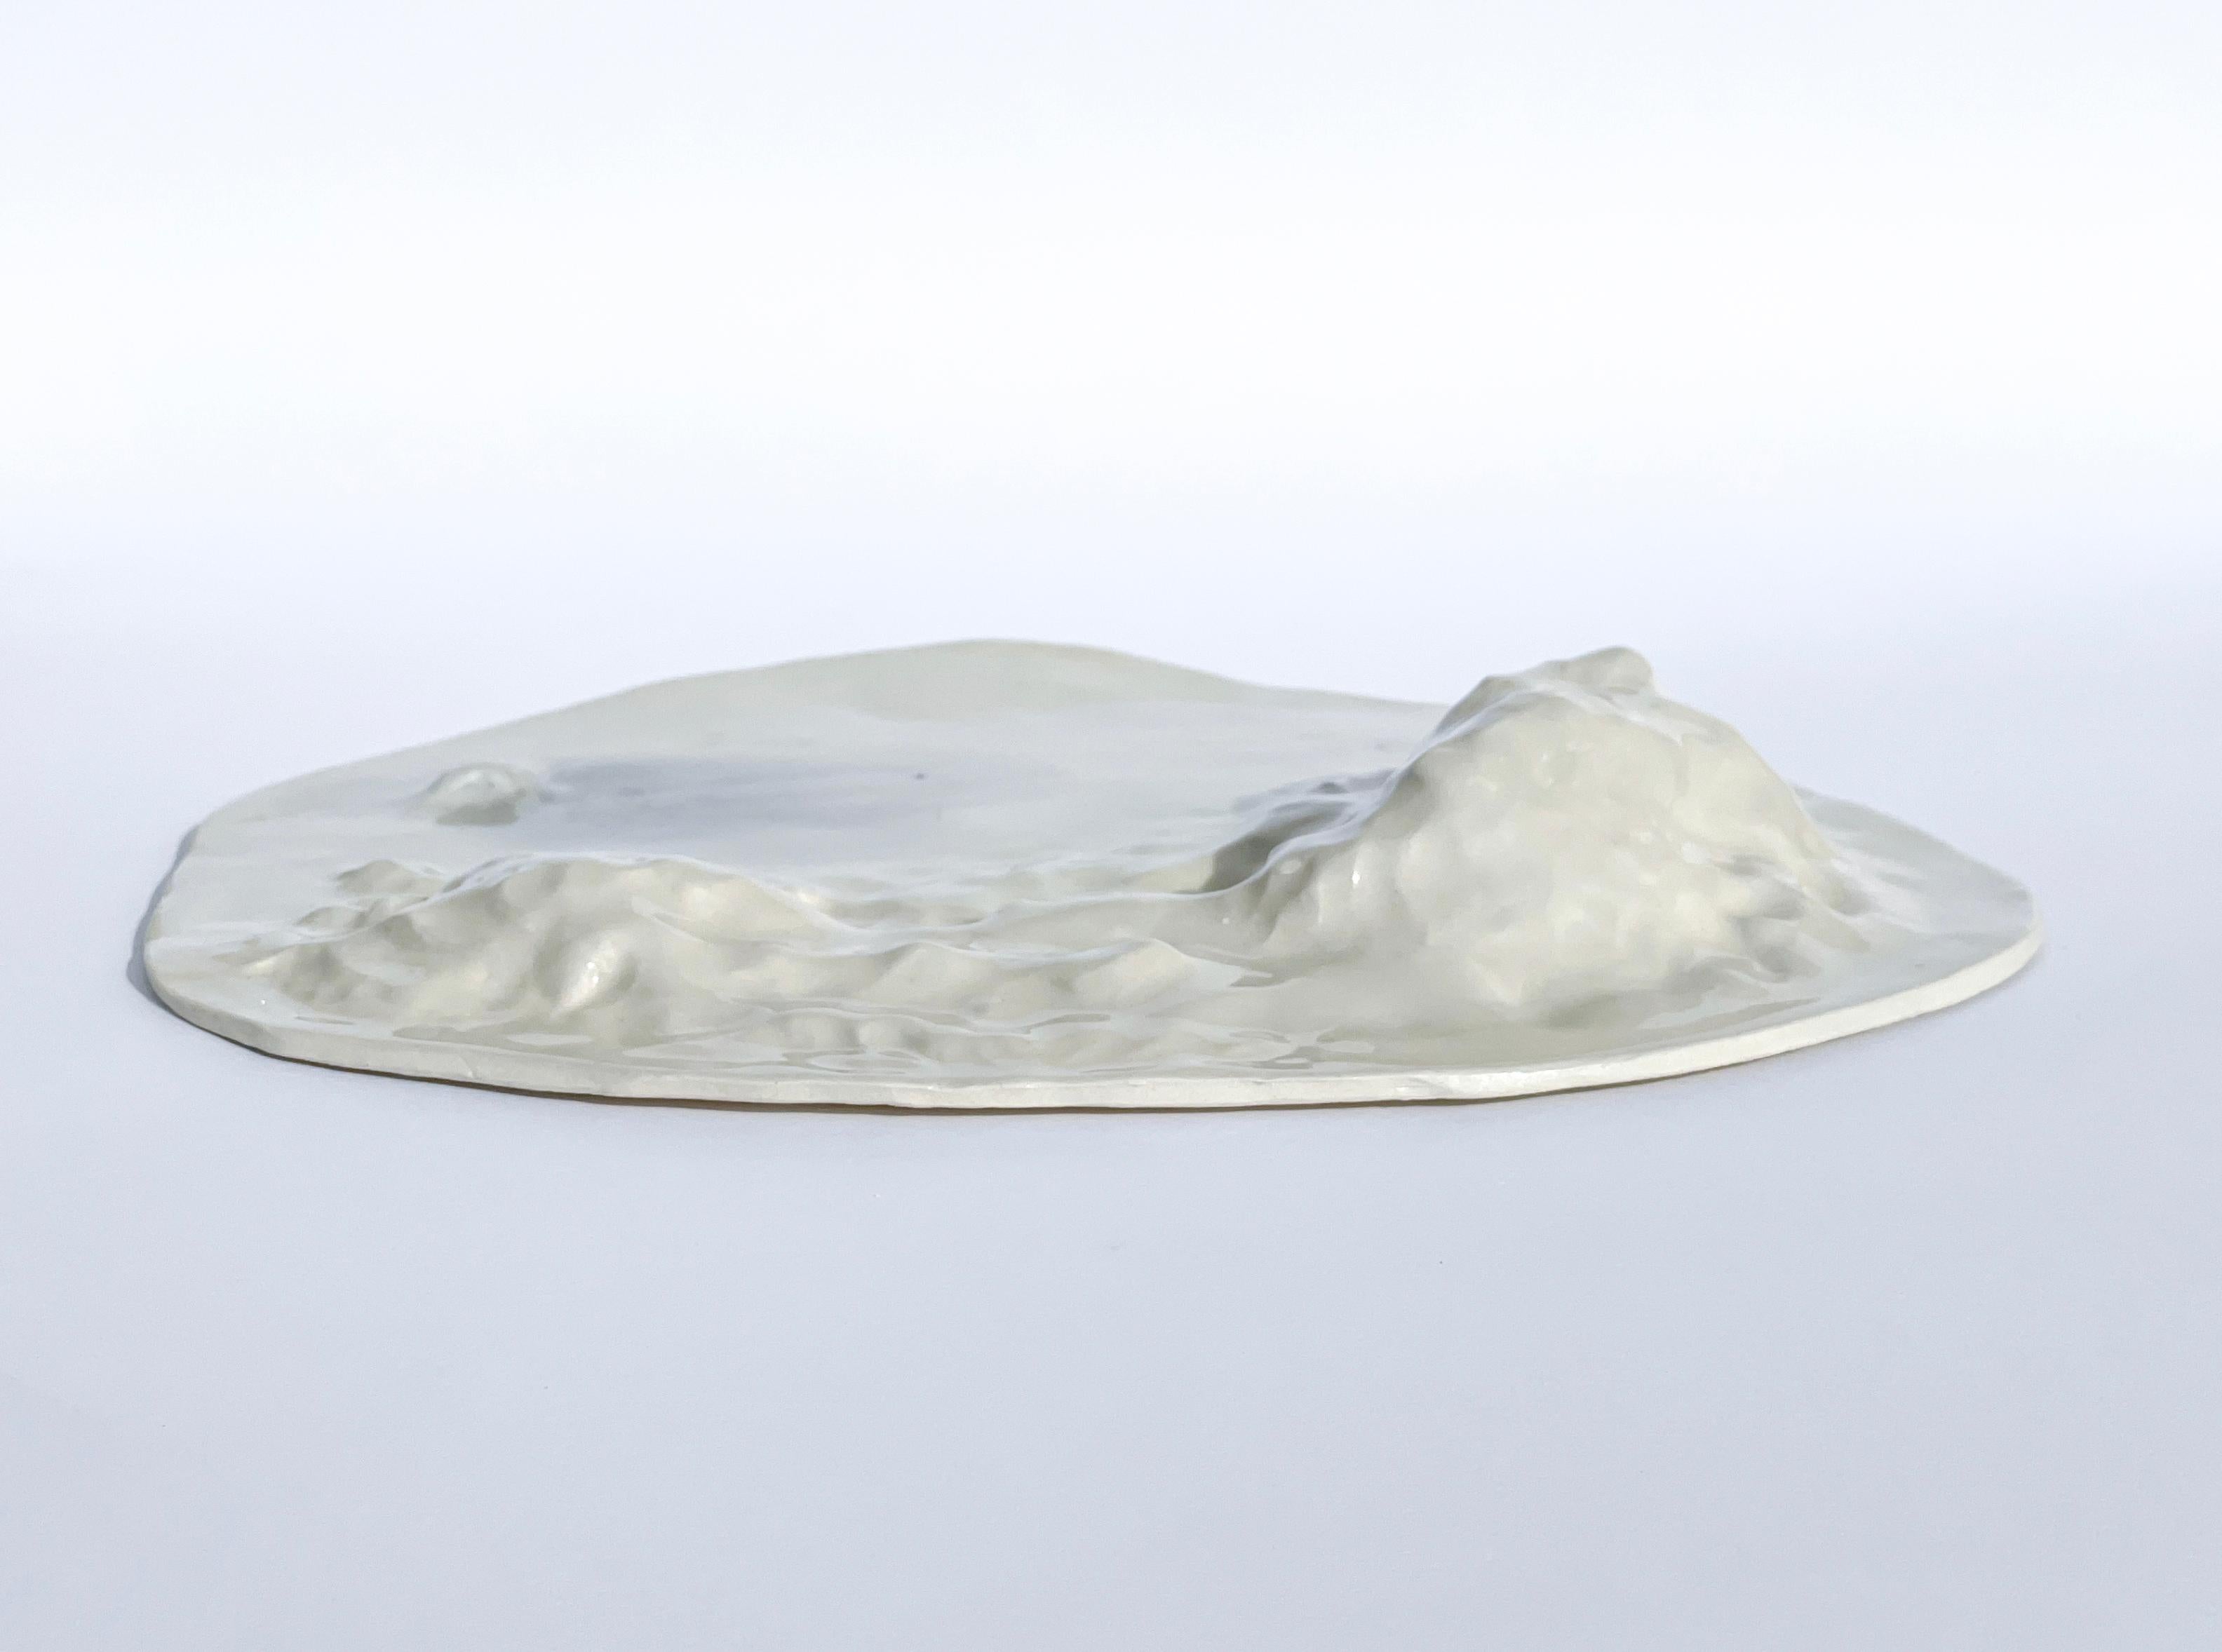 Contemporary Unique Sculptural 'Gongshi' Plates N0.8 Objet D'art in Glossy Finish For Sale